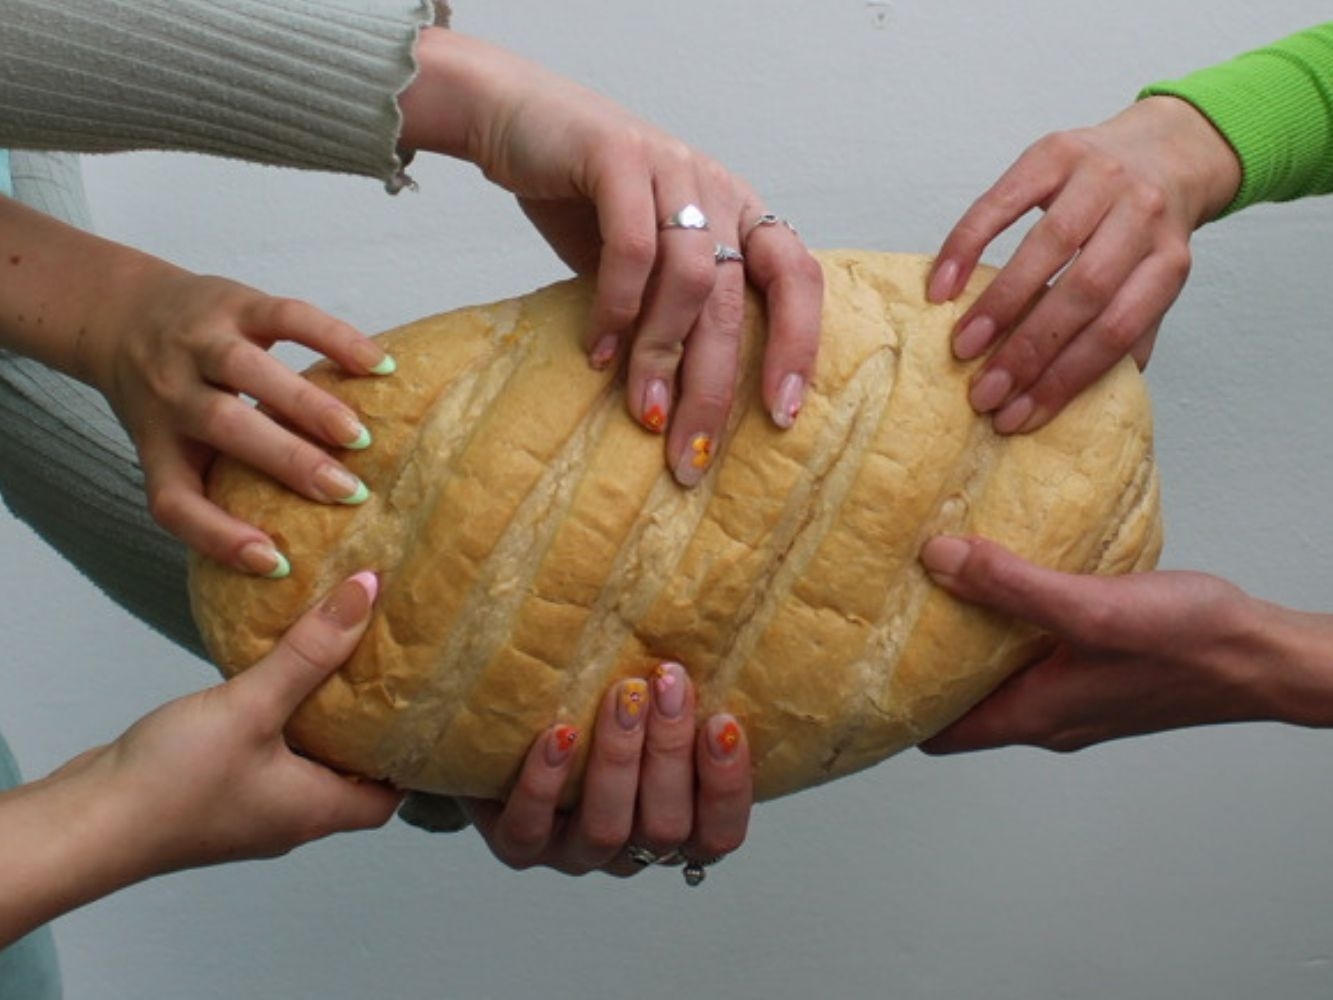 Six hands holding a large loaf of bread